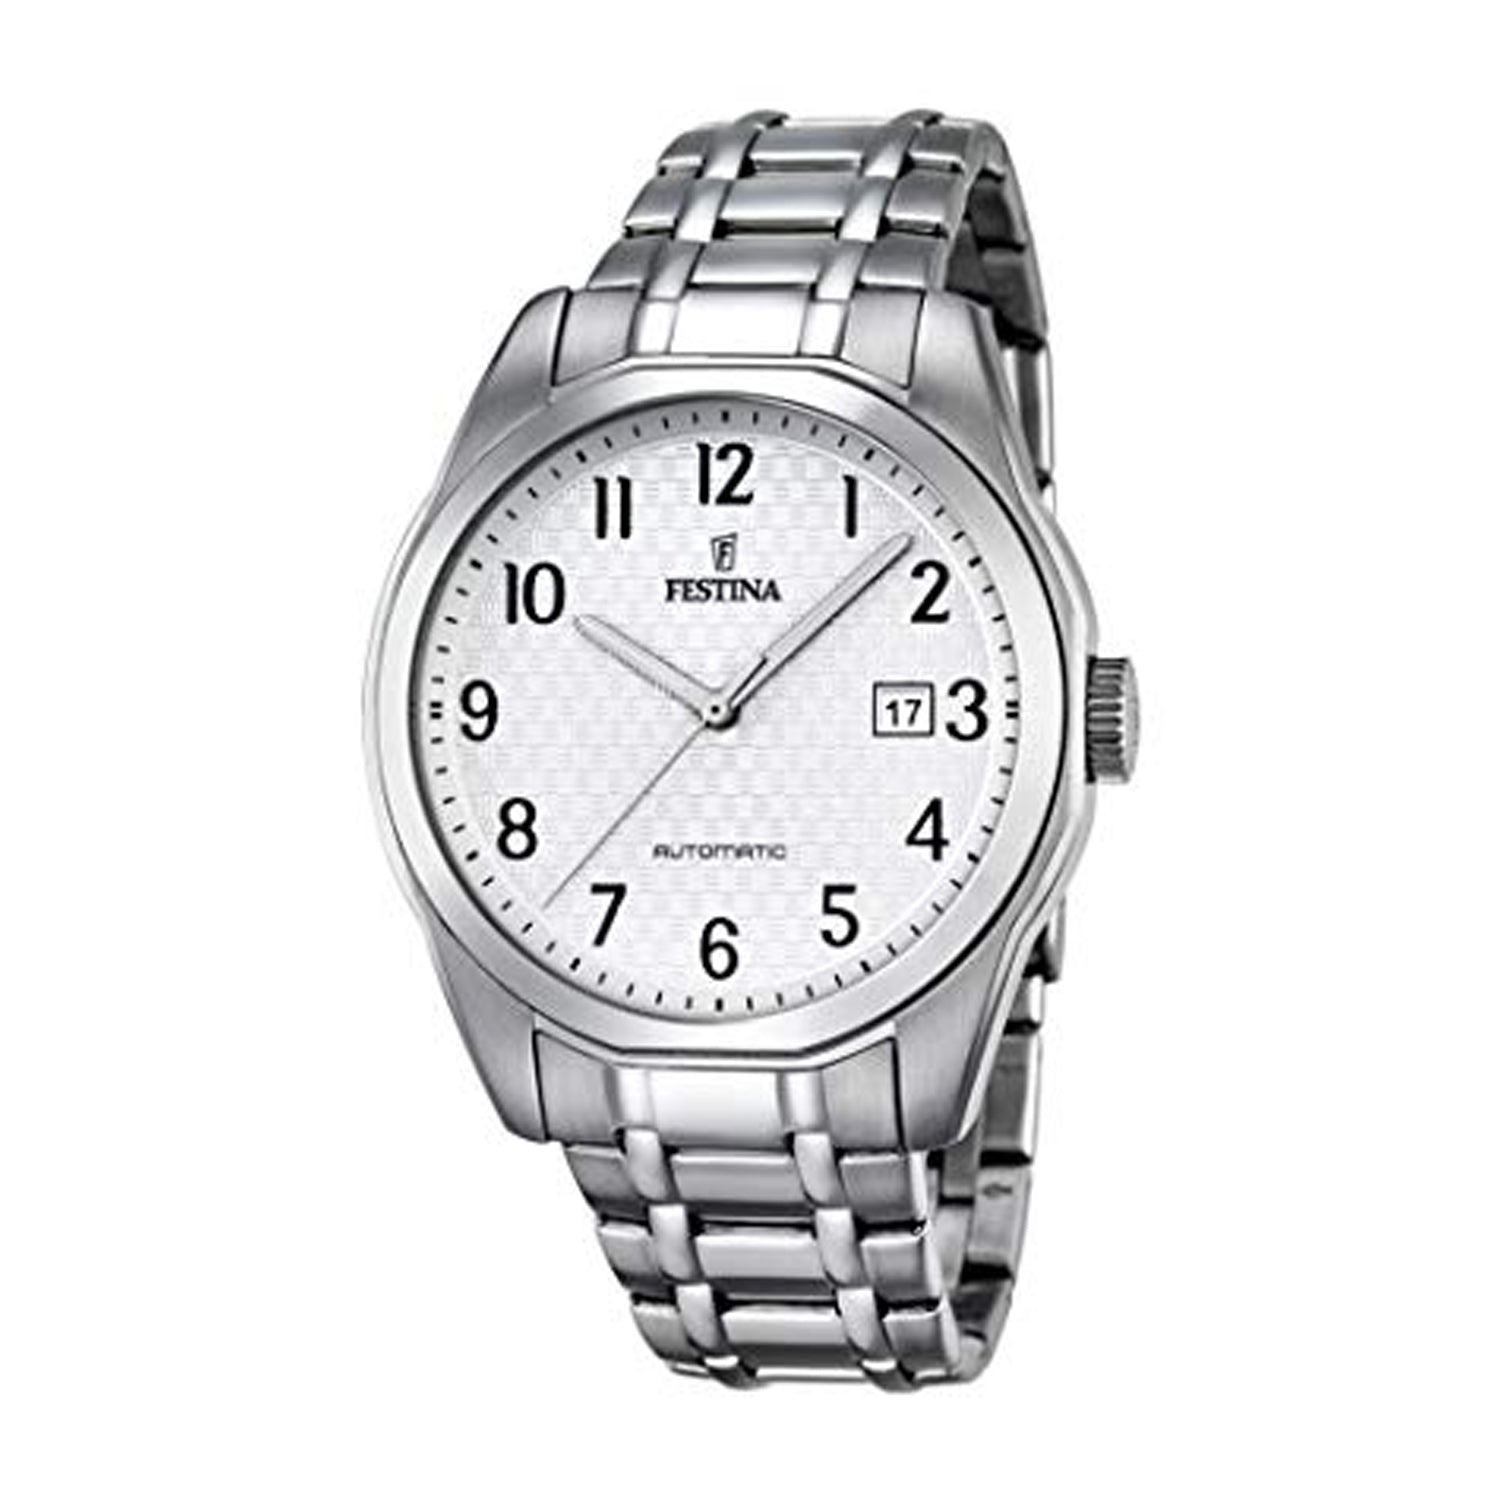 Festina Men's Automatic Watch, Silver and Gray Dial - F16884/1